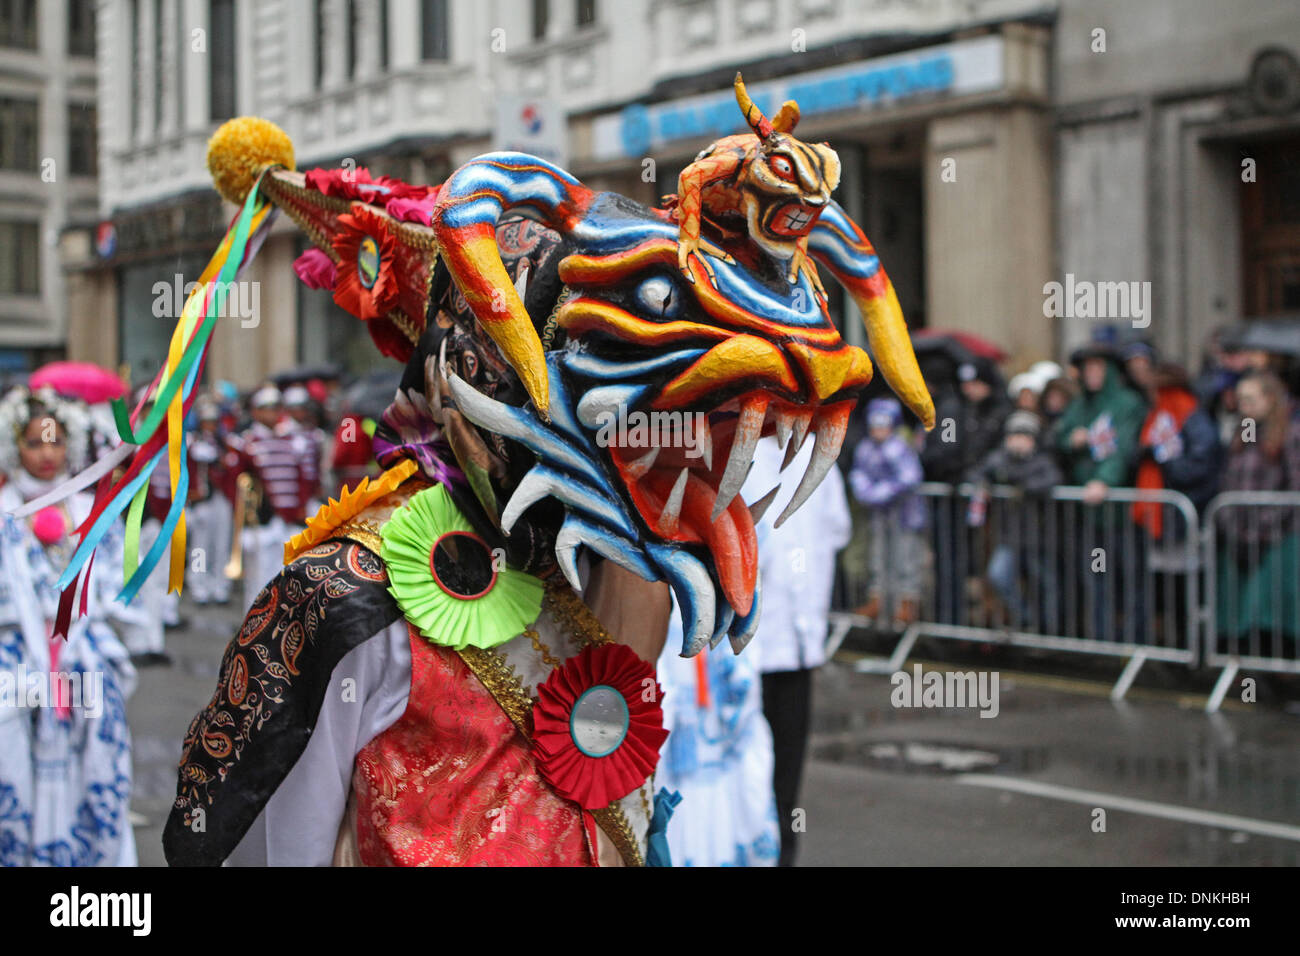 London,UK,1st January 2014,A colourful mask at the London's New Year's Day Parade 2014 Credit: Keith Larby/Alamy Live News Stock Photo